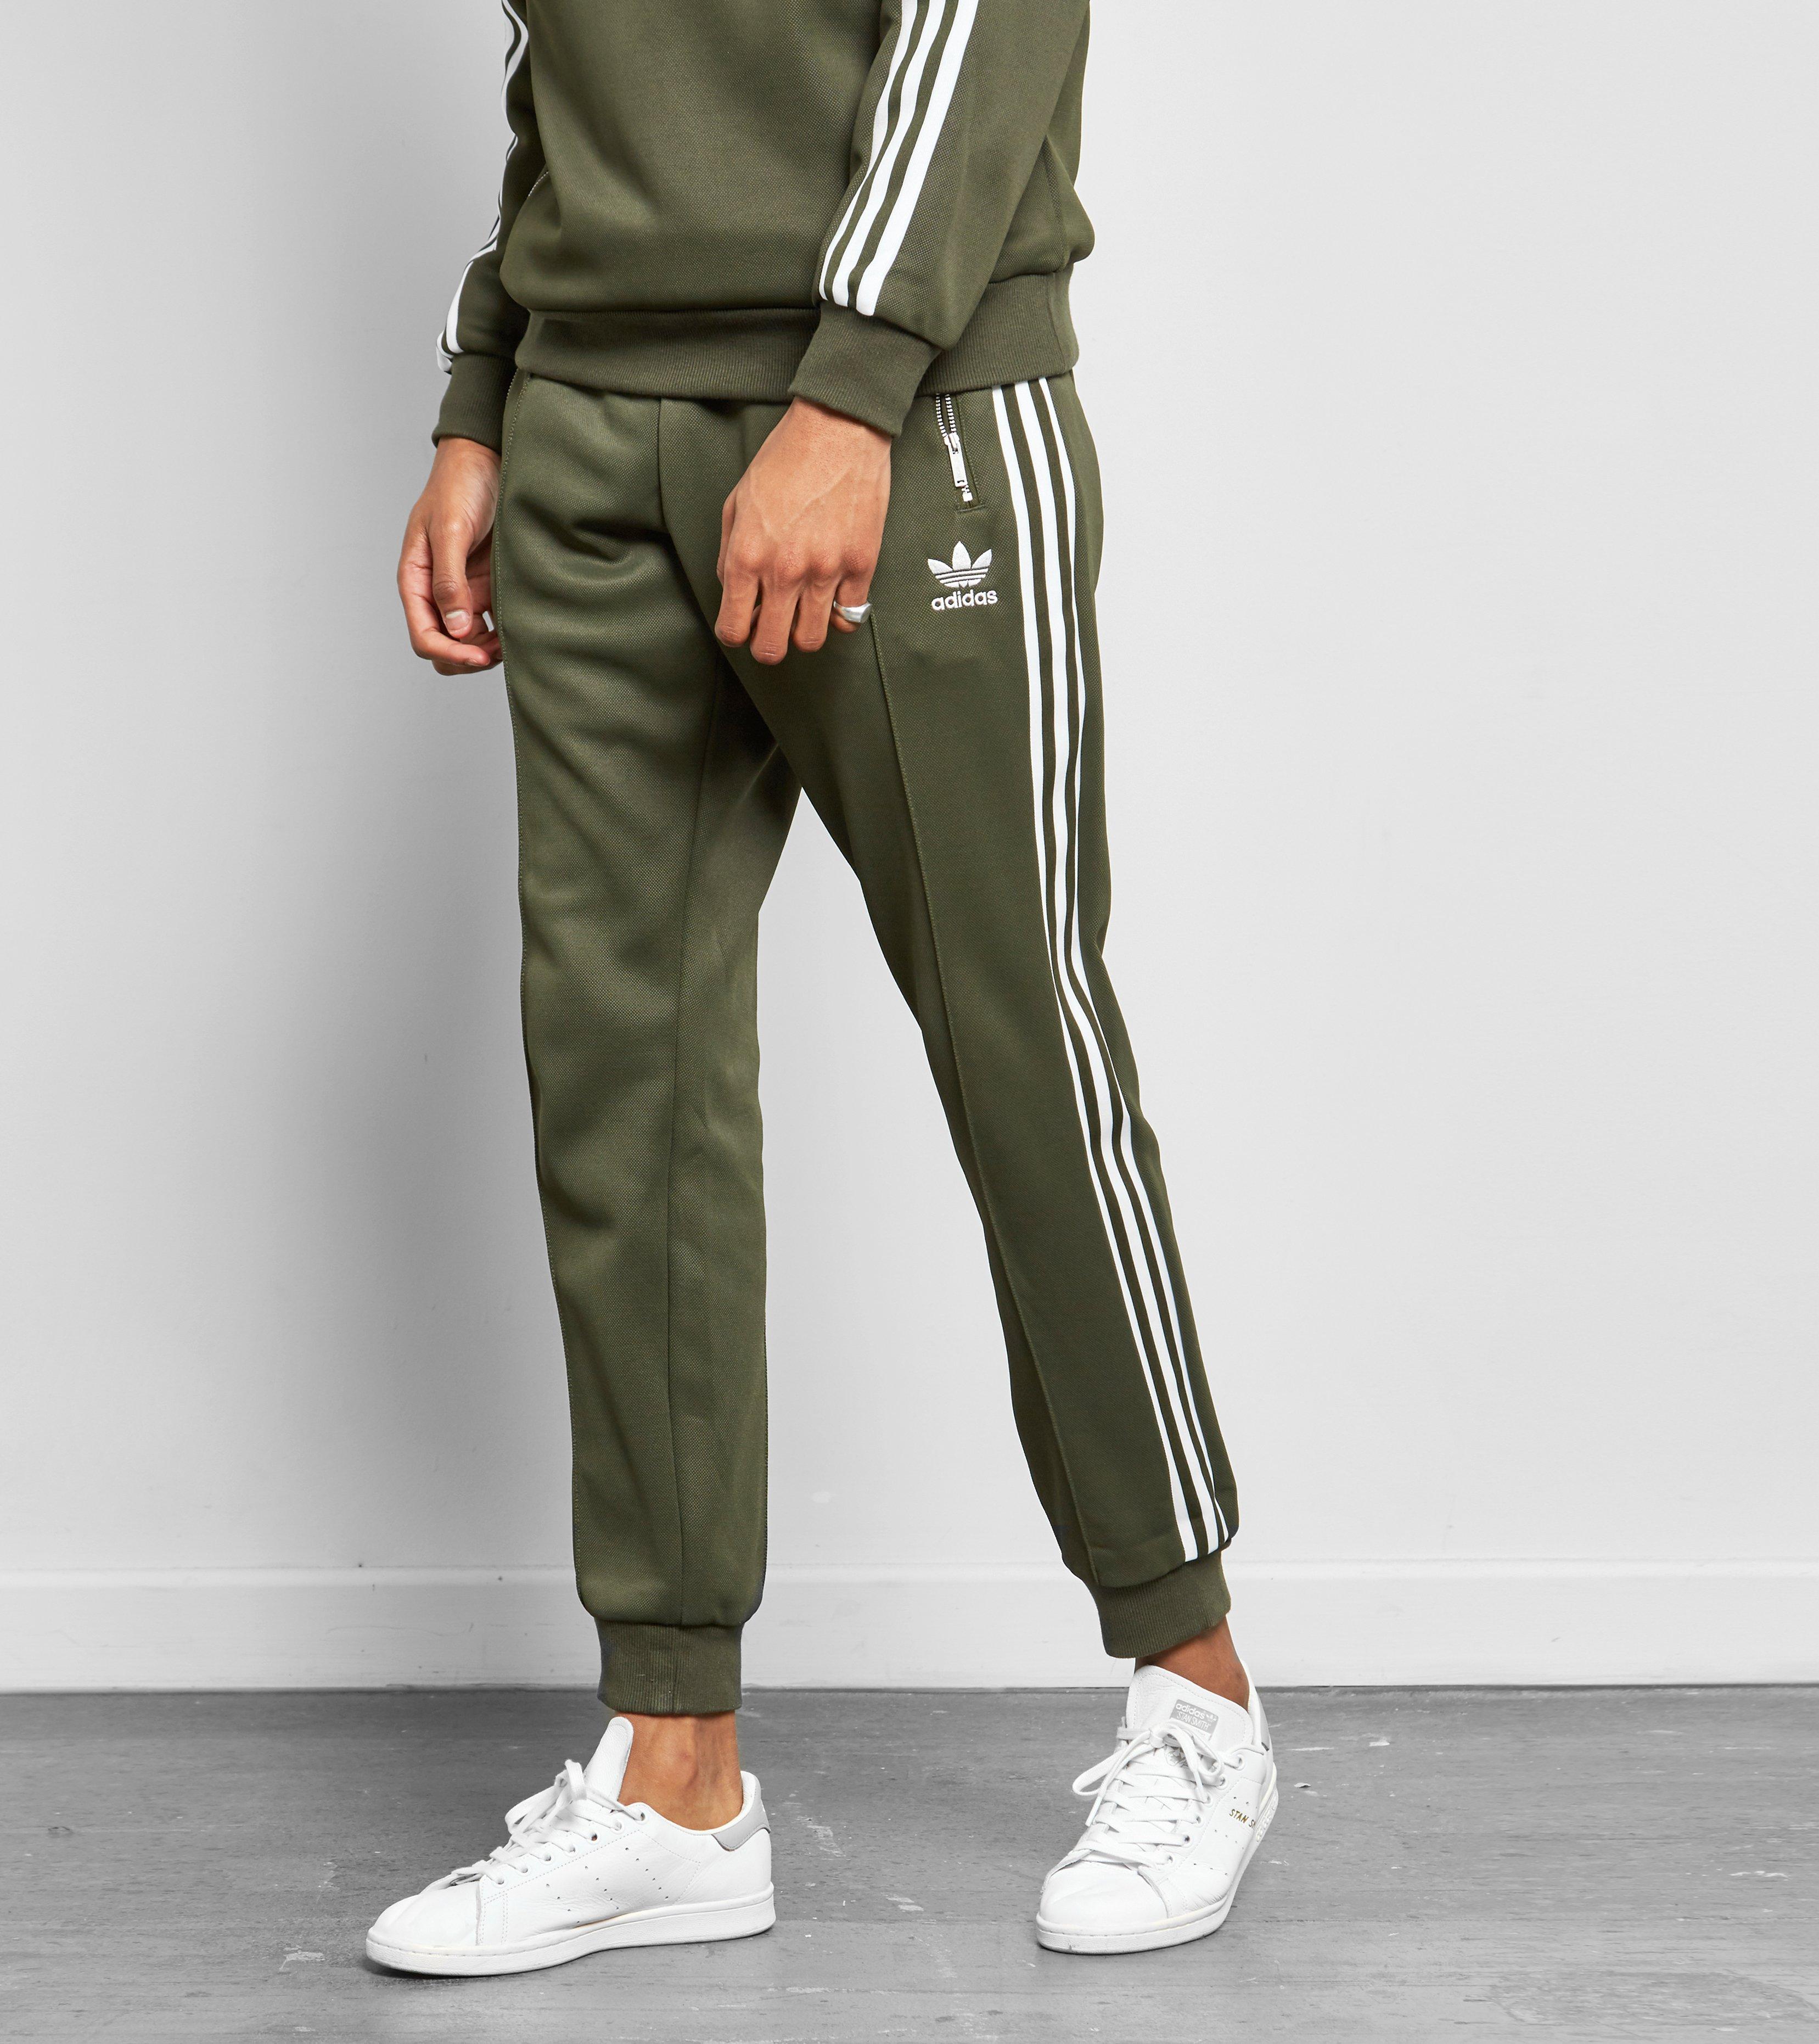 Lyst - Adidas Originals Cntp Track Pants - Size? Exclusive in Green for Men